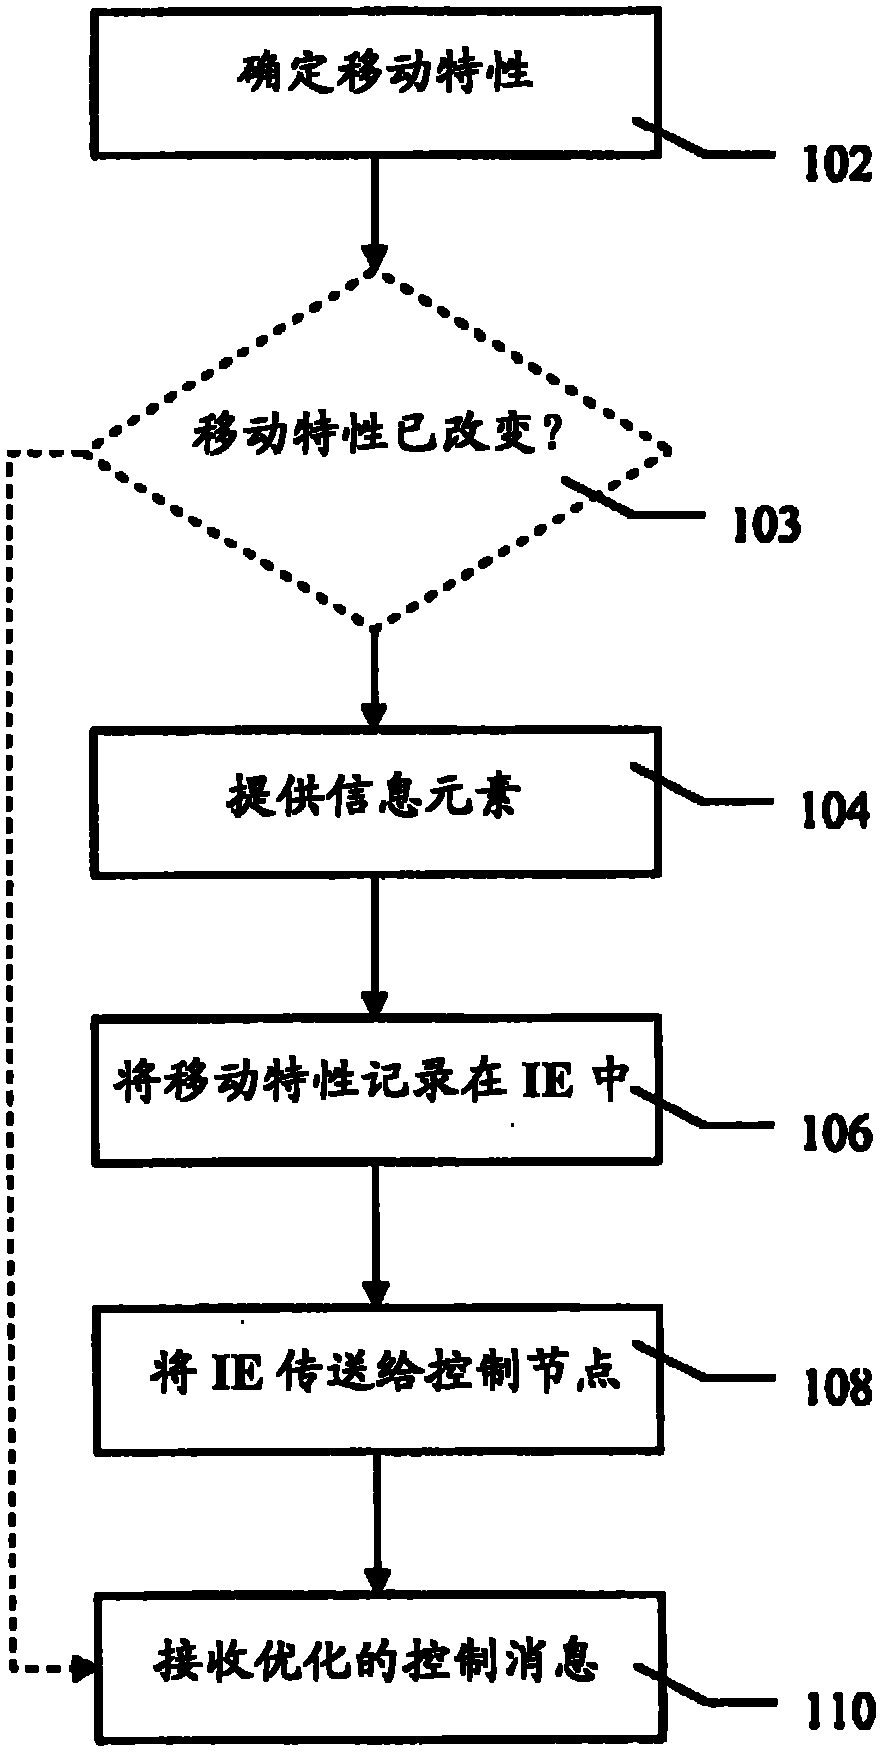 Method of controlling user equipment in wireless telecommunications network